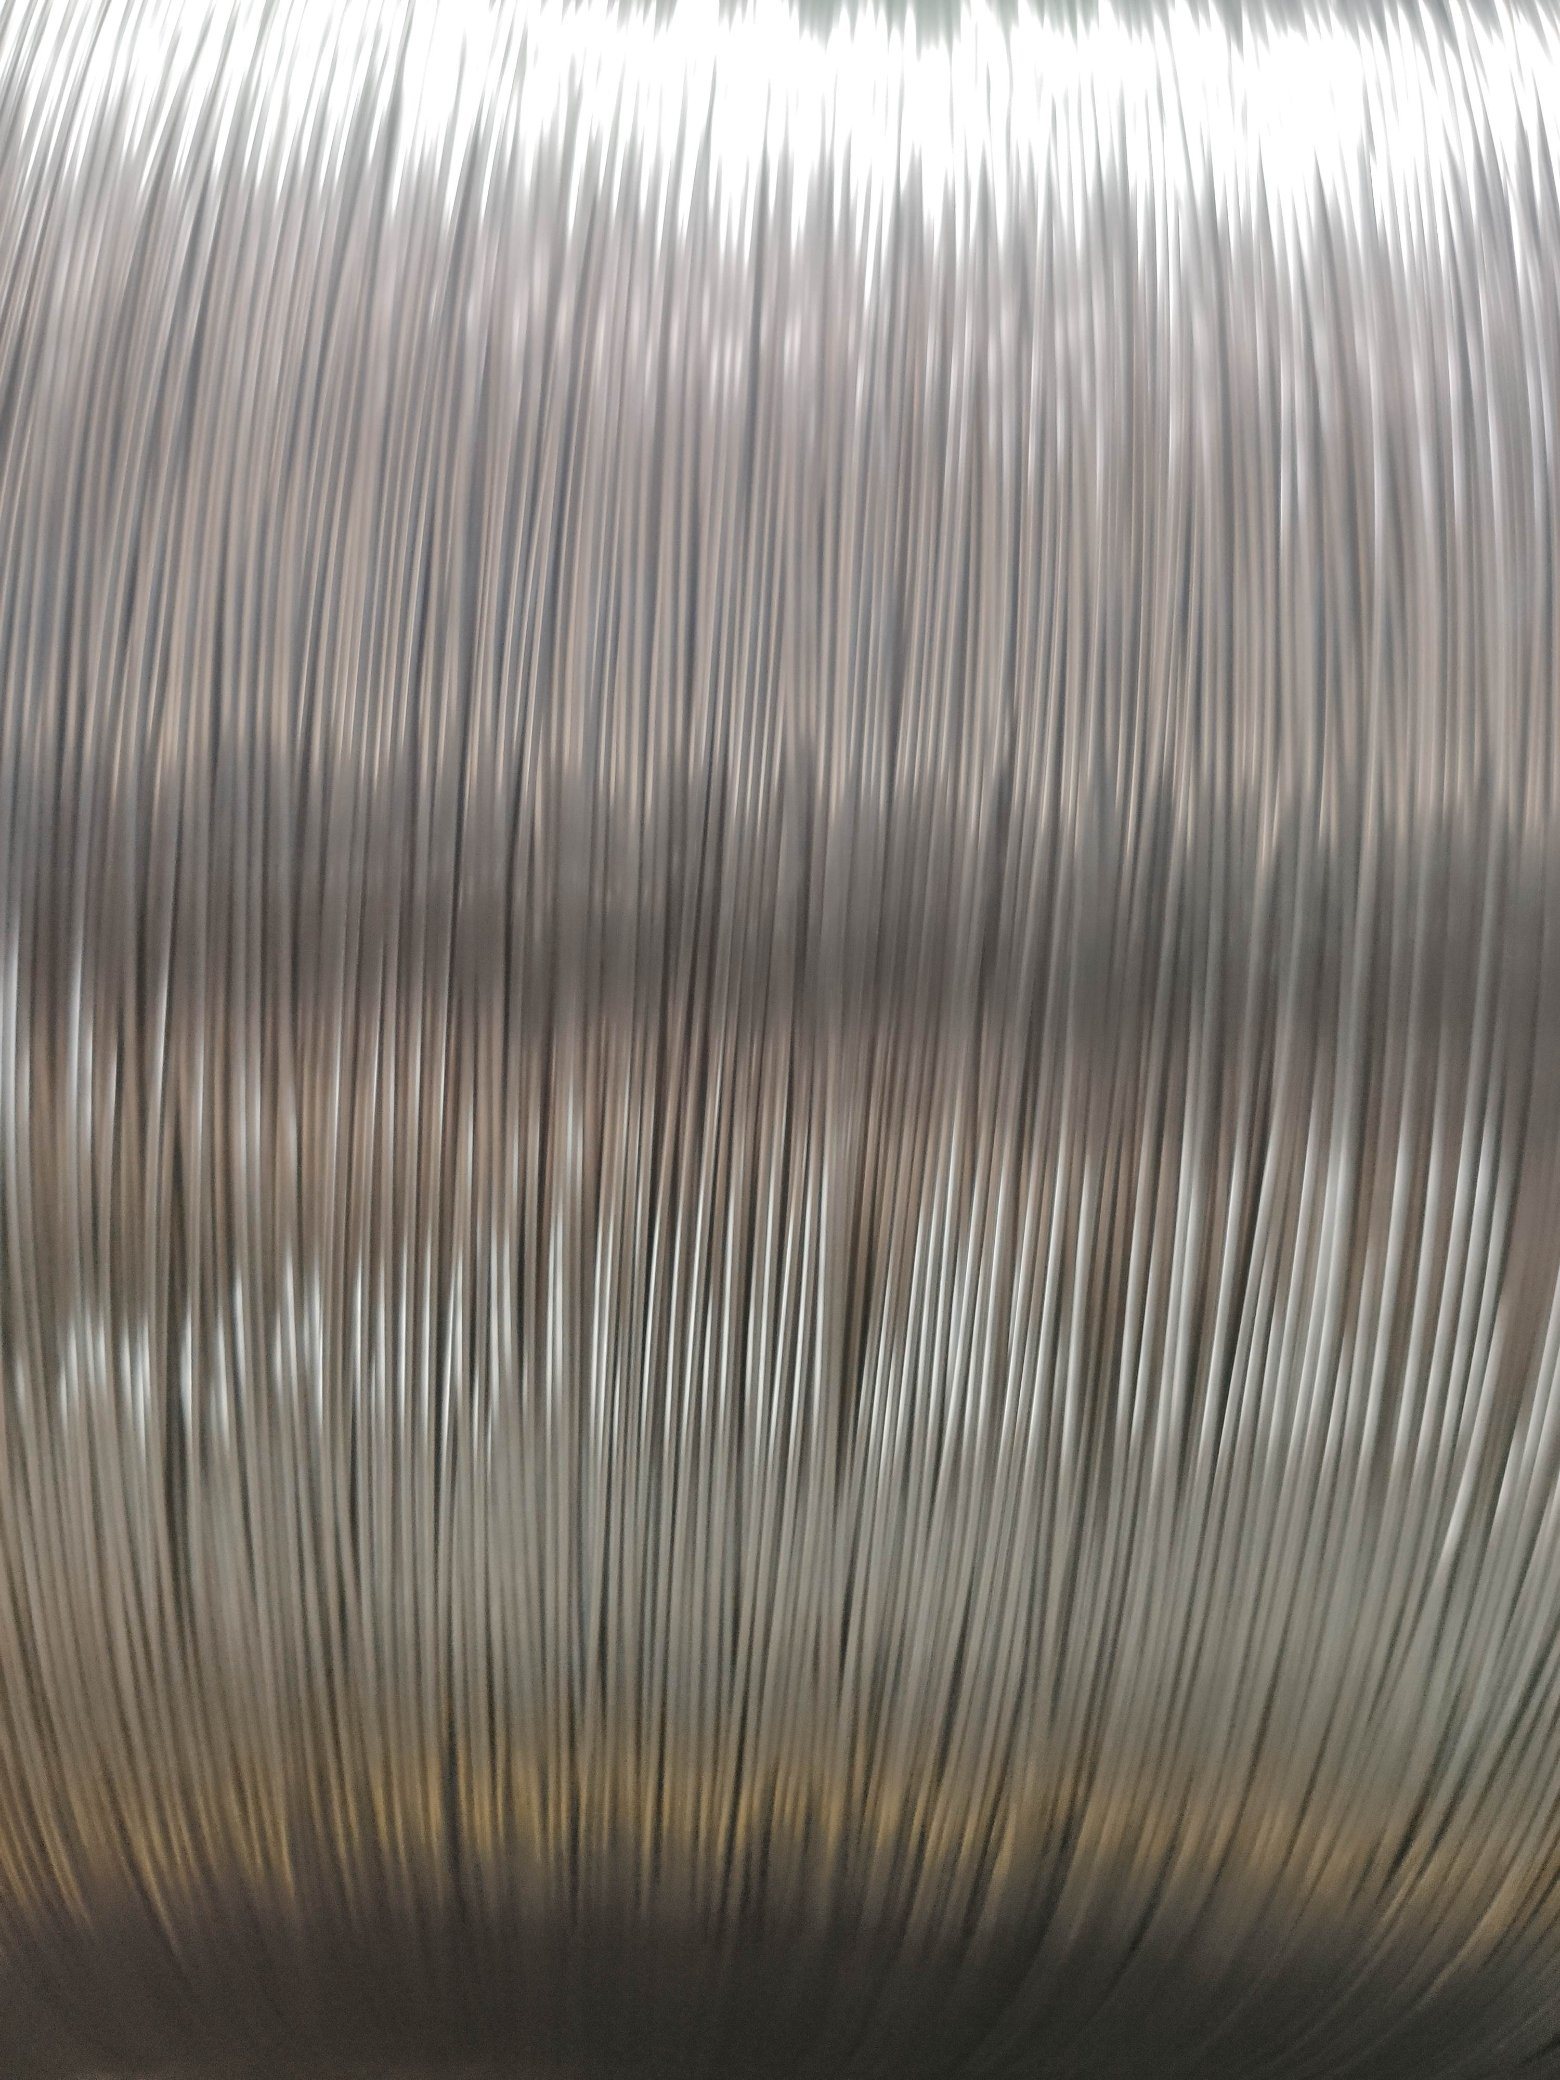 Cold-Drawn Wire Rod/Low Carbon Steel Wire/High Tensile Strength Stainless Steel Electro Polishing Quality (EPQ) Wire